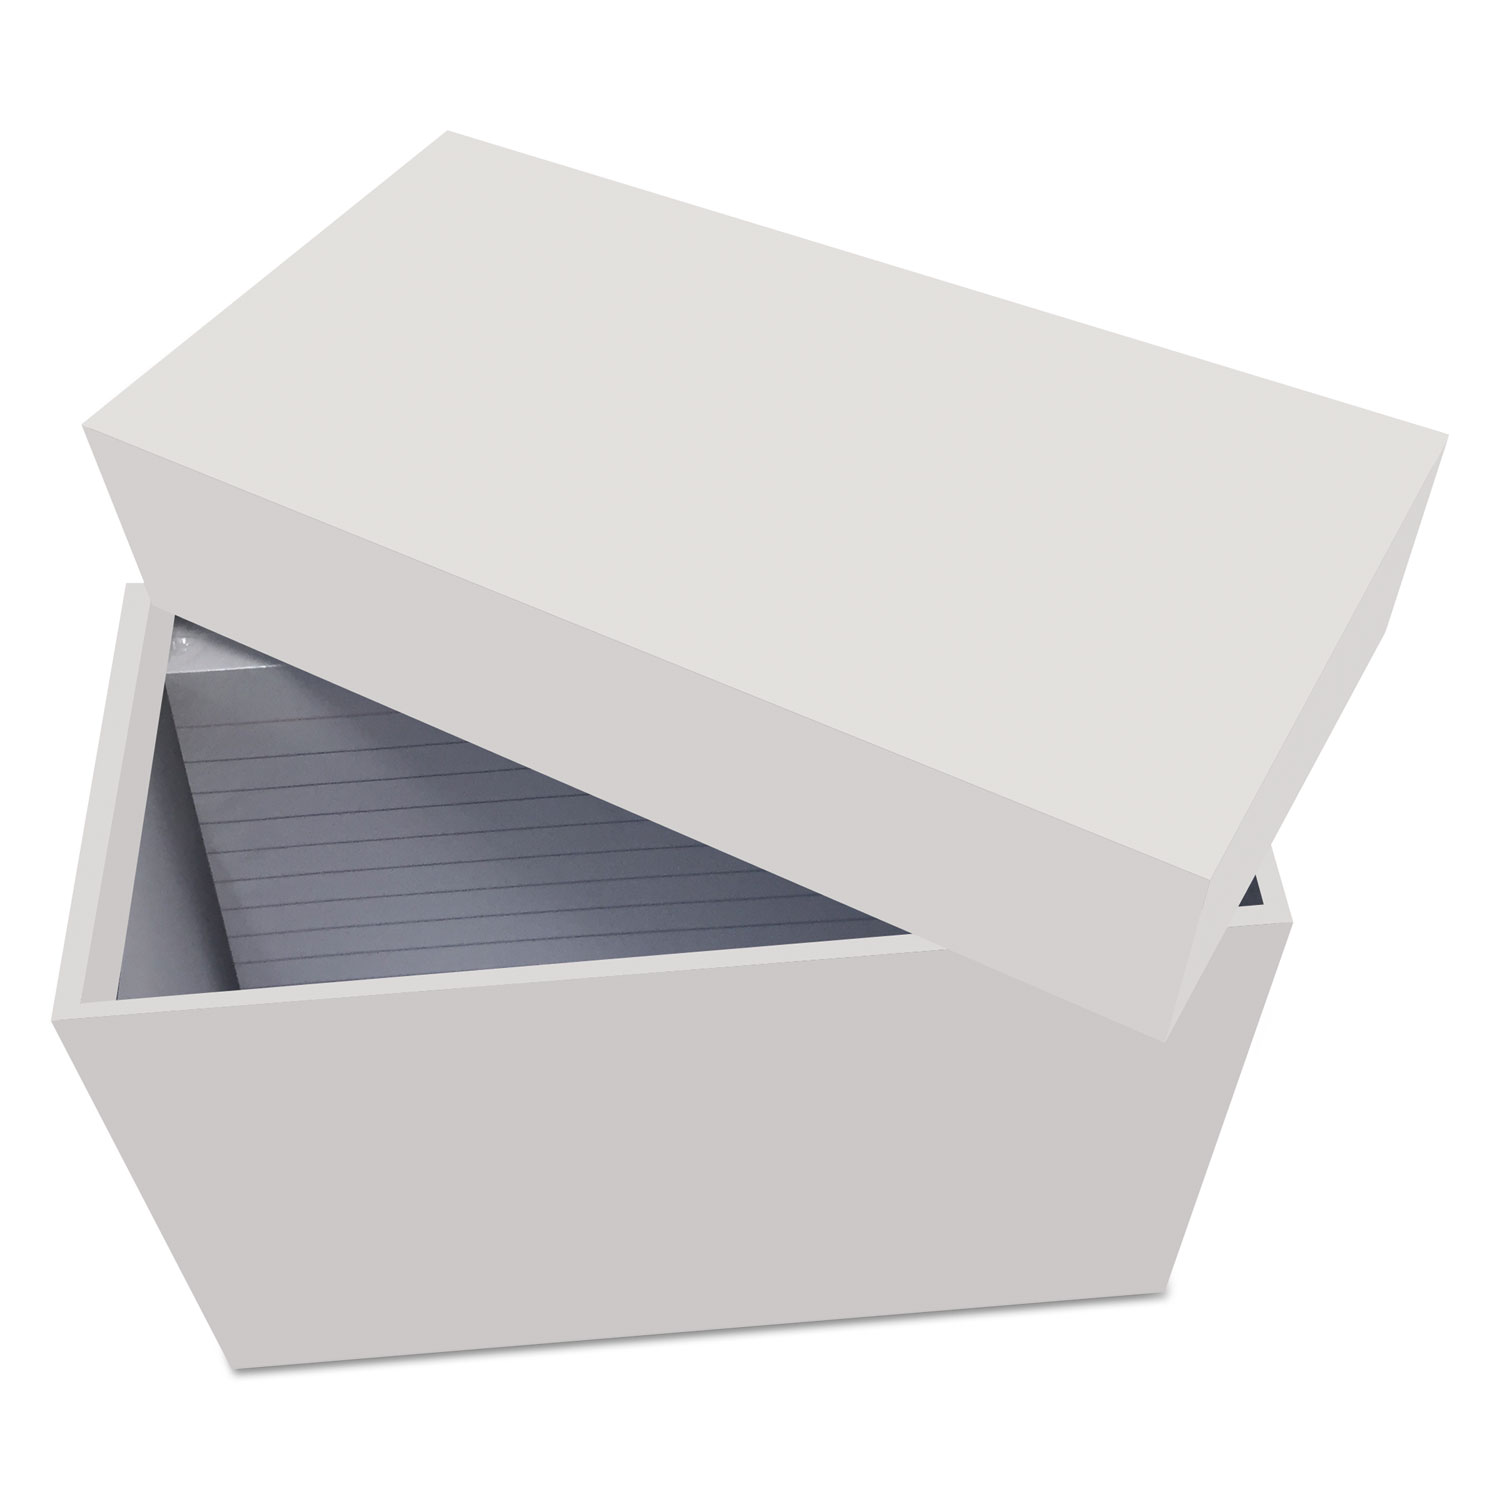  Universal UNV47281 Index Card Box with 100 Ruled Index Cards, 4 x 6, Gray (UNV47281) 